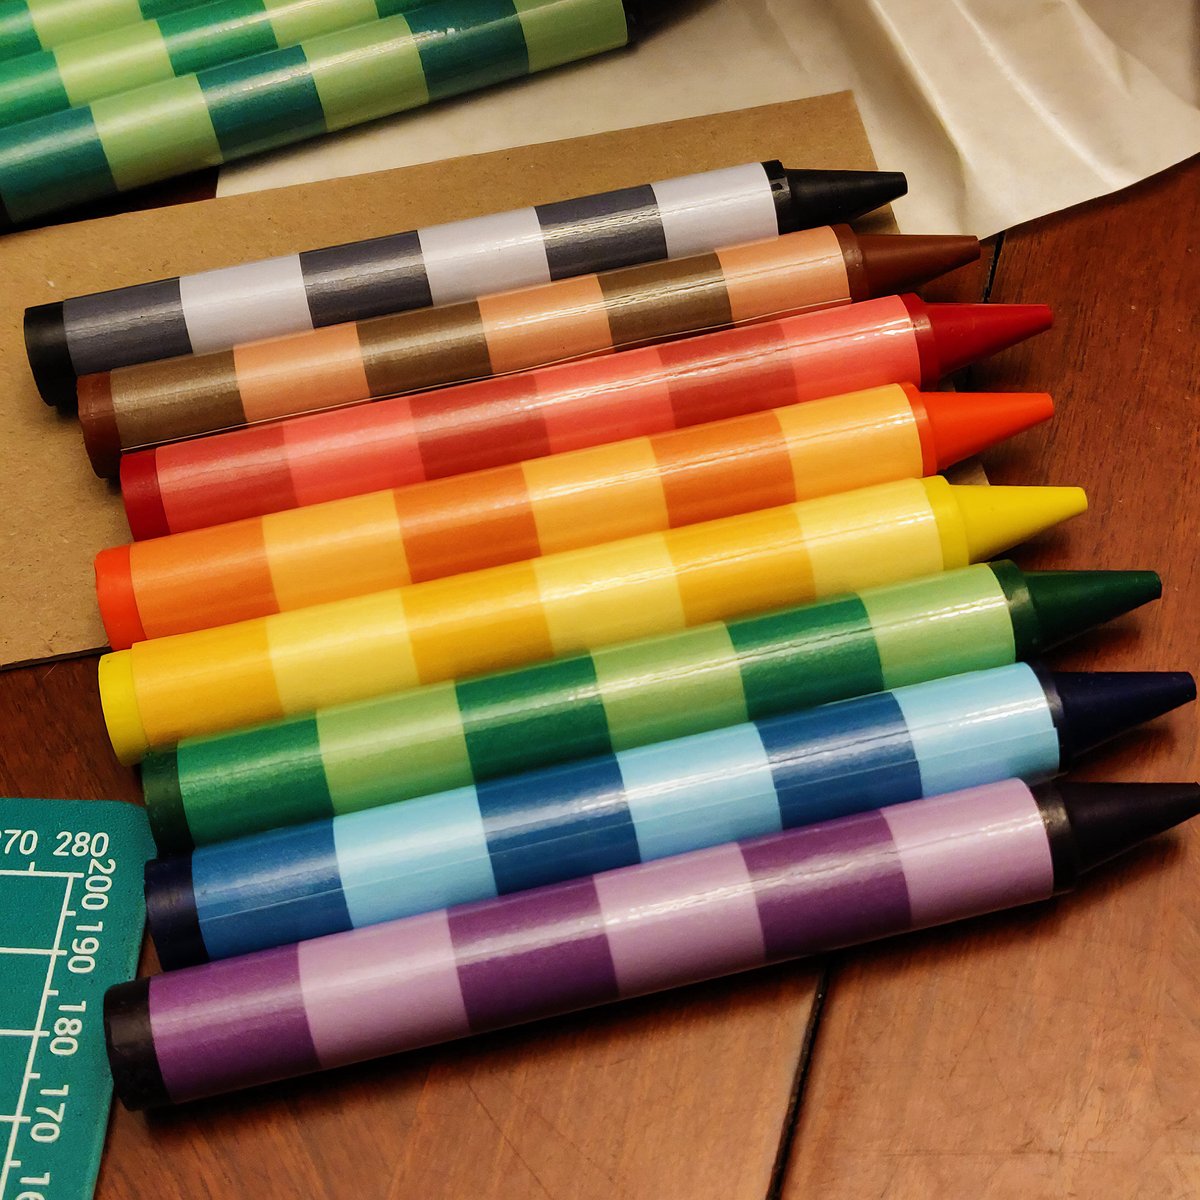 blues clues striped crayons